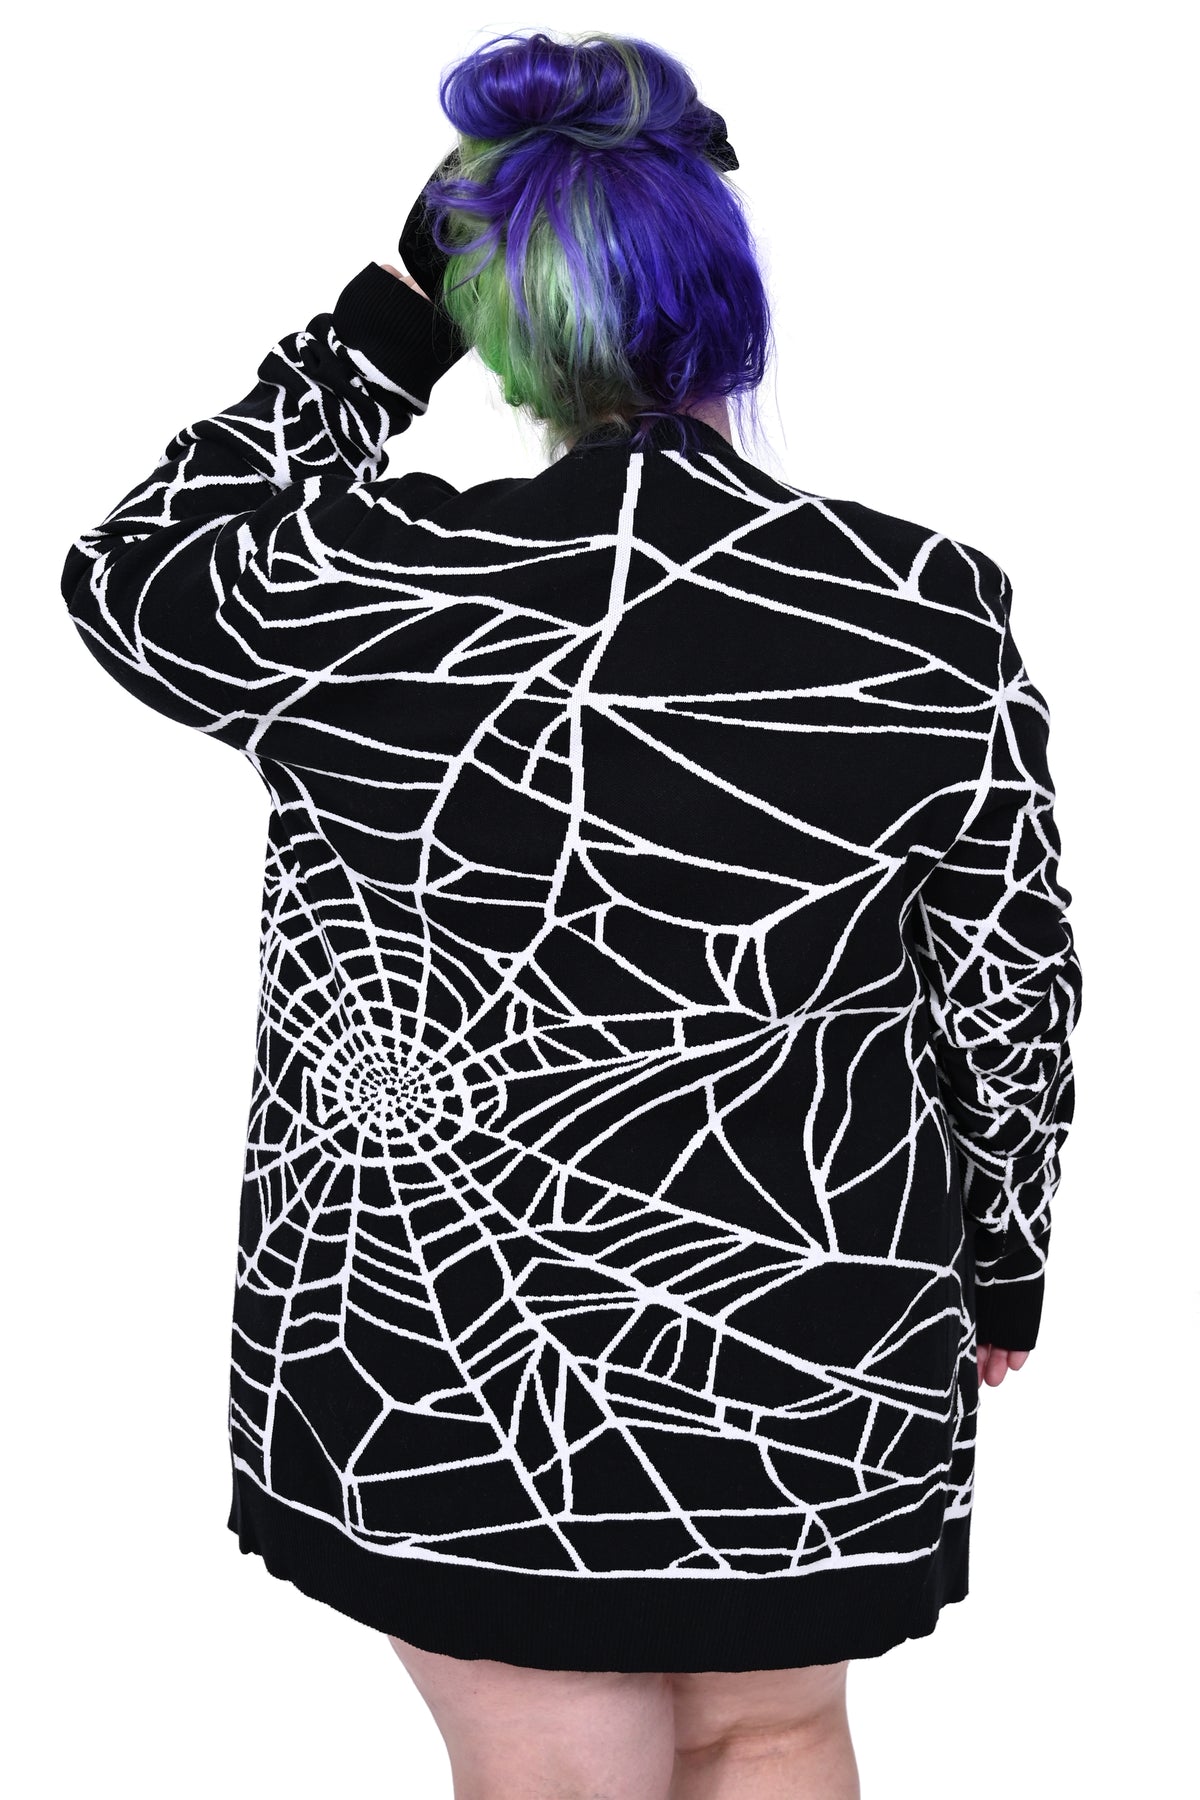 black unisex cardigan with all over white spider web design